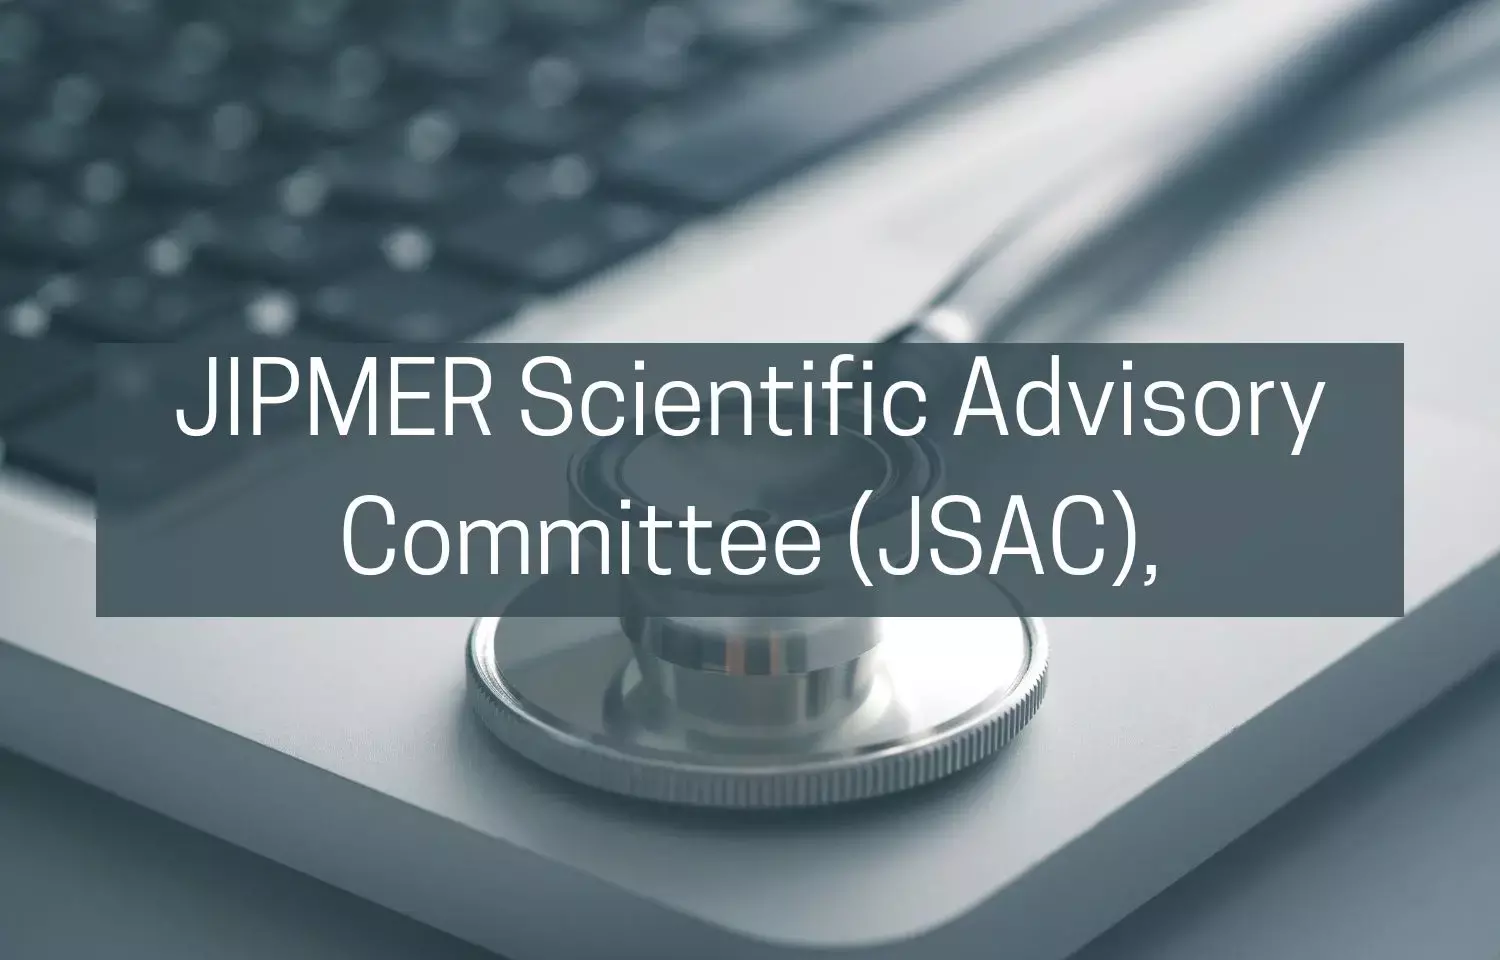 JIPMER Invites Submission of Proposal To Scientific Advisory Committee For July 2023, Details